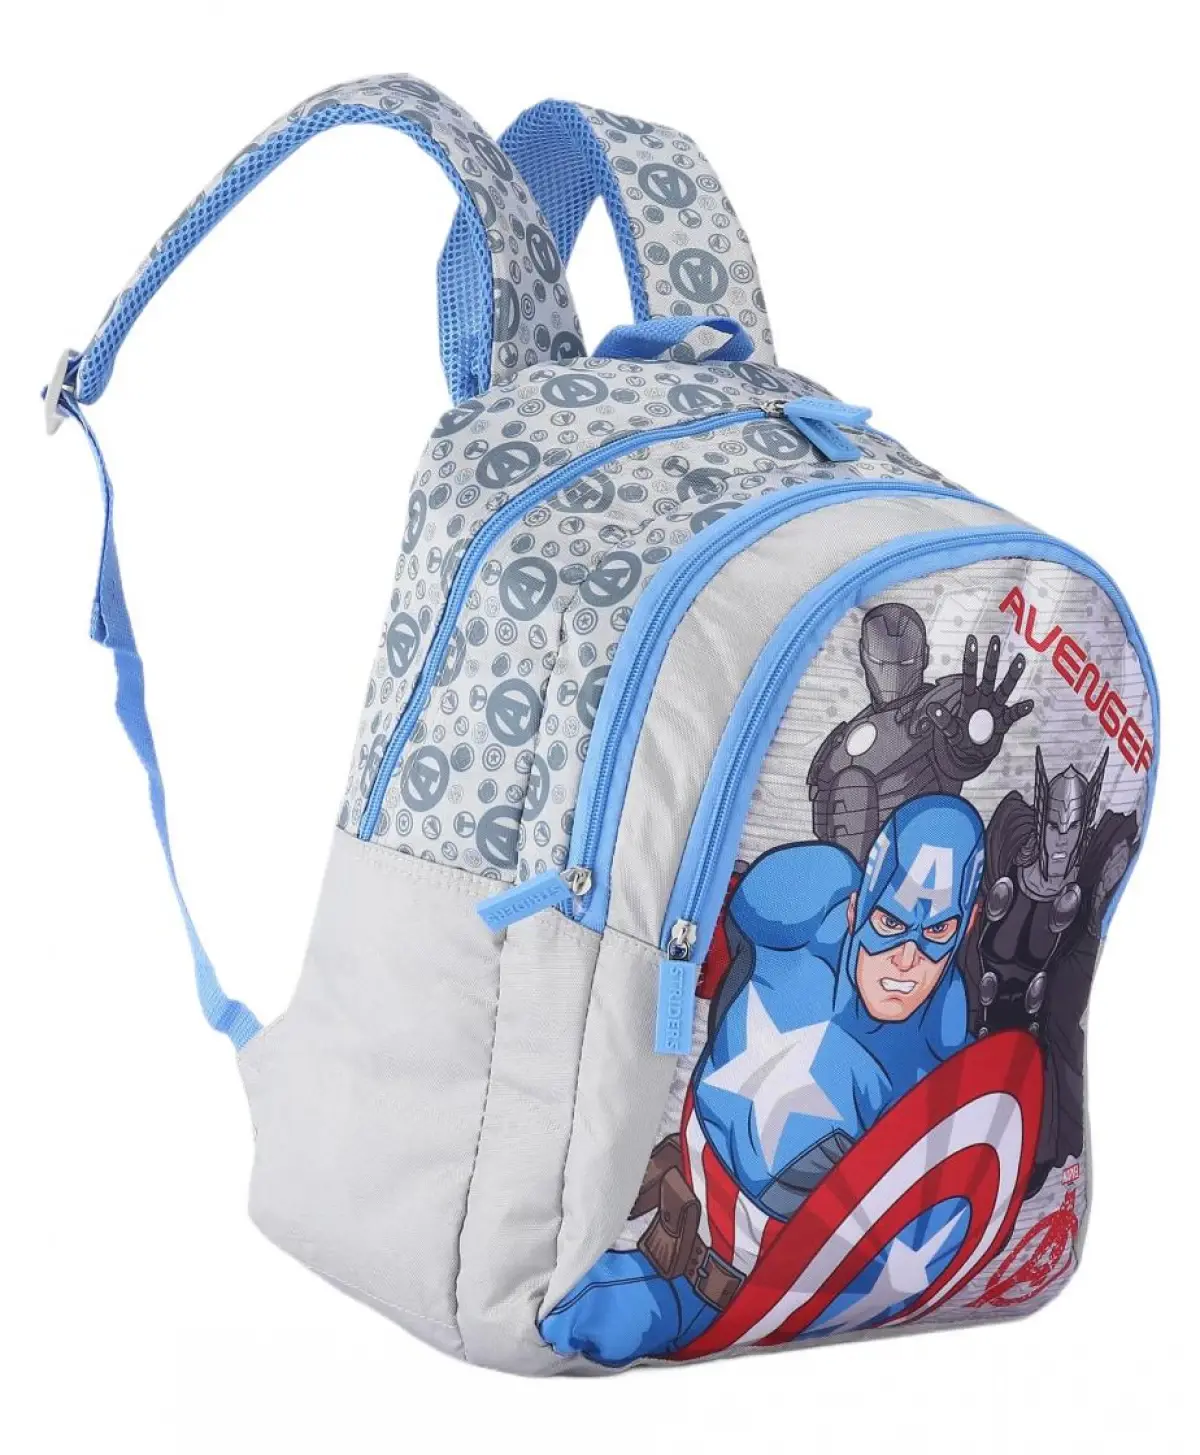 Striders 16 inches Avengers School Bag A Playful Companion for School Days Multicolor For Kids Ages 6Y+